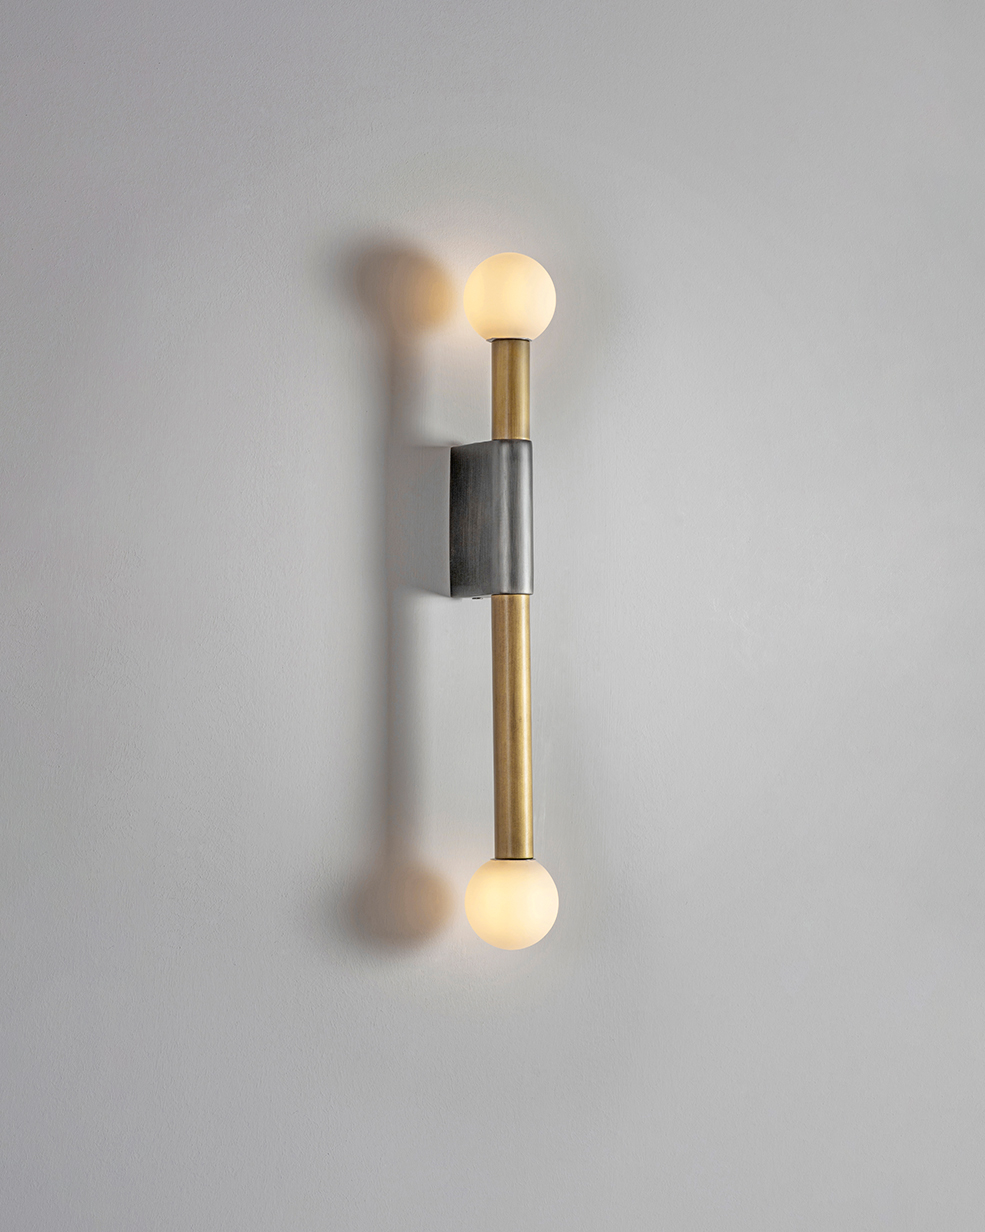 Square in Circle_Pole and Circle Wall Light_Lighting_Studio Fenice_2